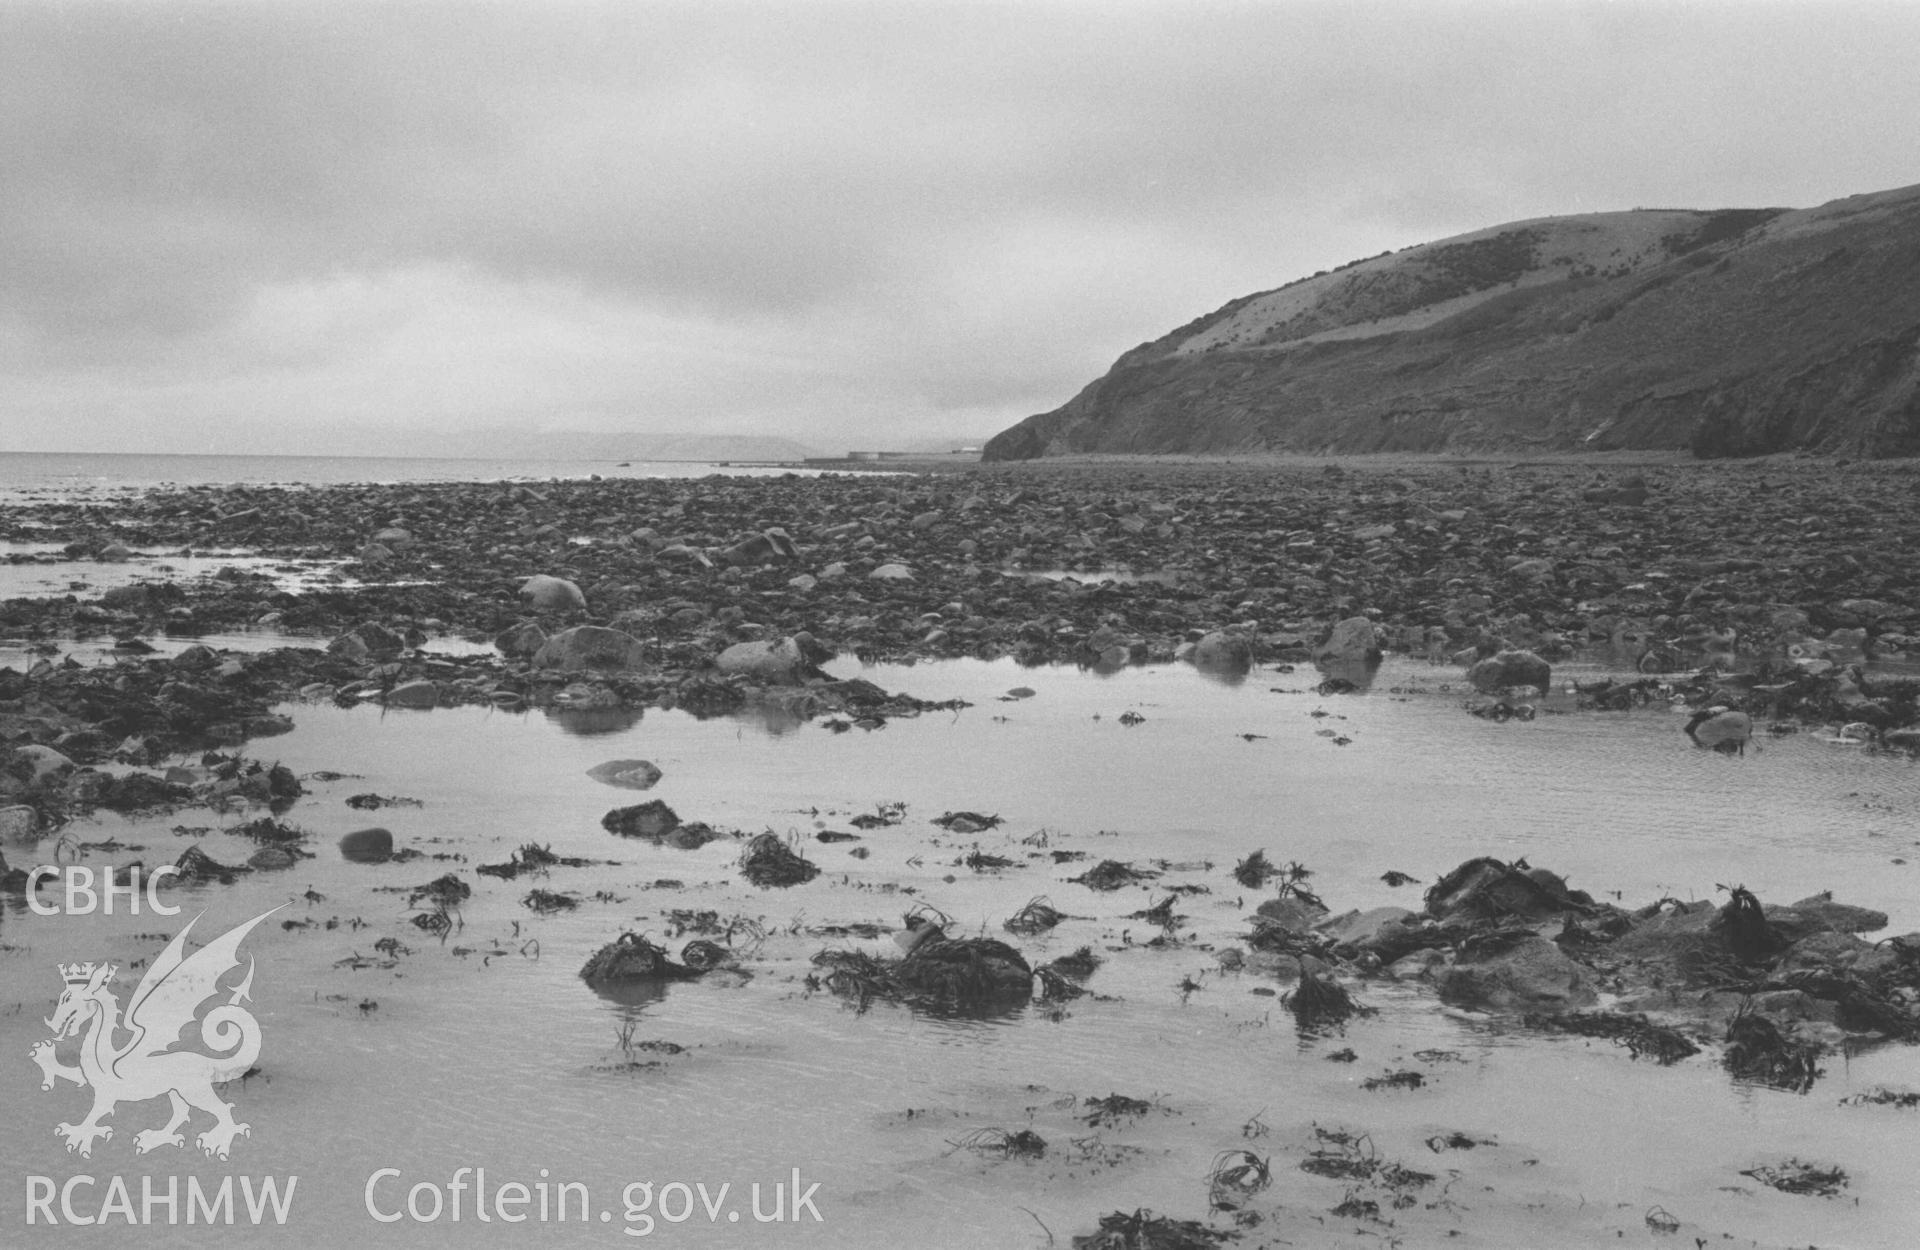 Digital copy of a black and white negative showing view up the coast from opposite Cwm Gilfach towards Aberaeron at low tide. Photographed by Arthur Chater on 3 January 1969. Looking north east from Grid Reference SN 4388 6178.